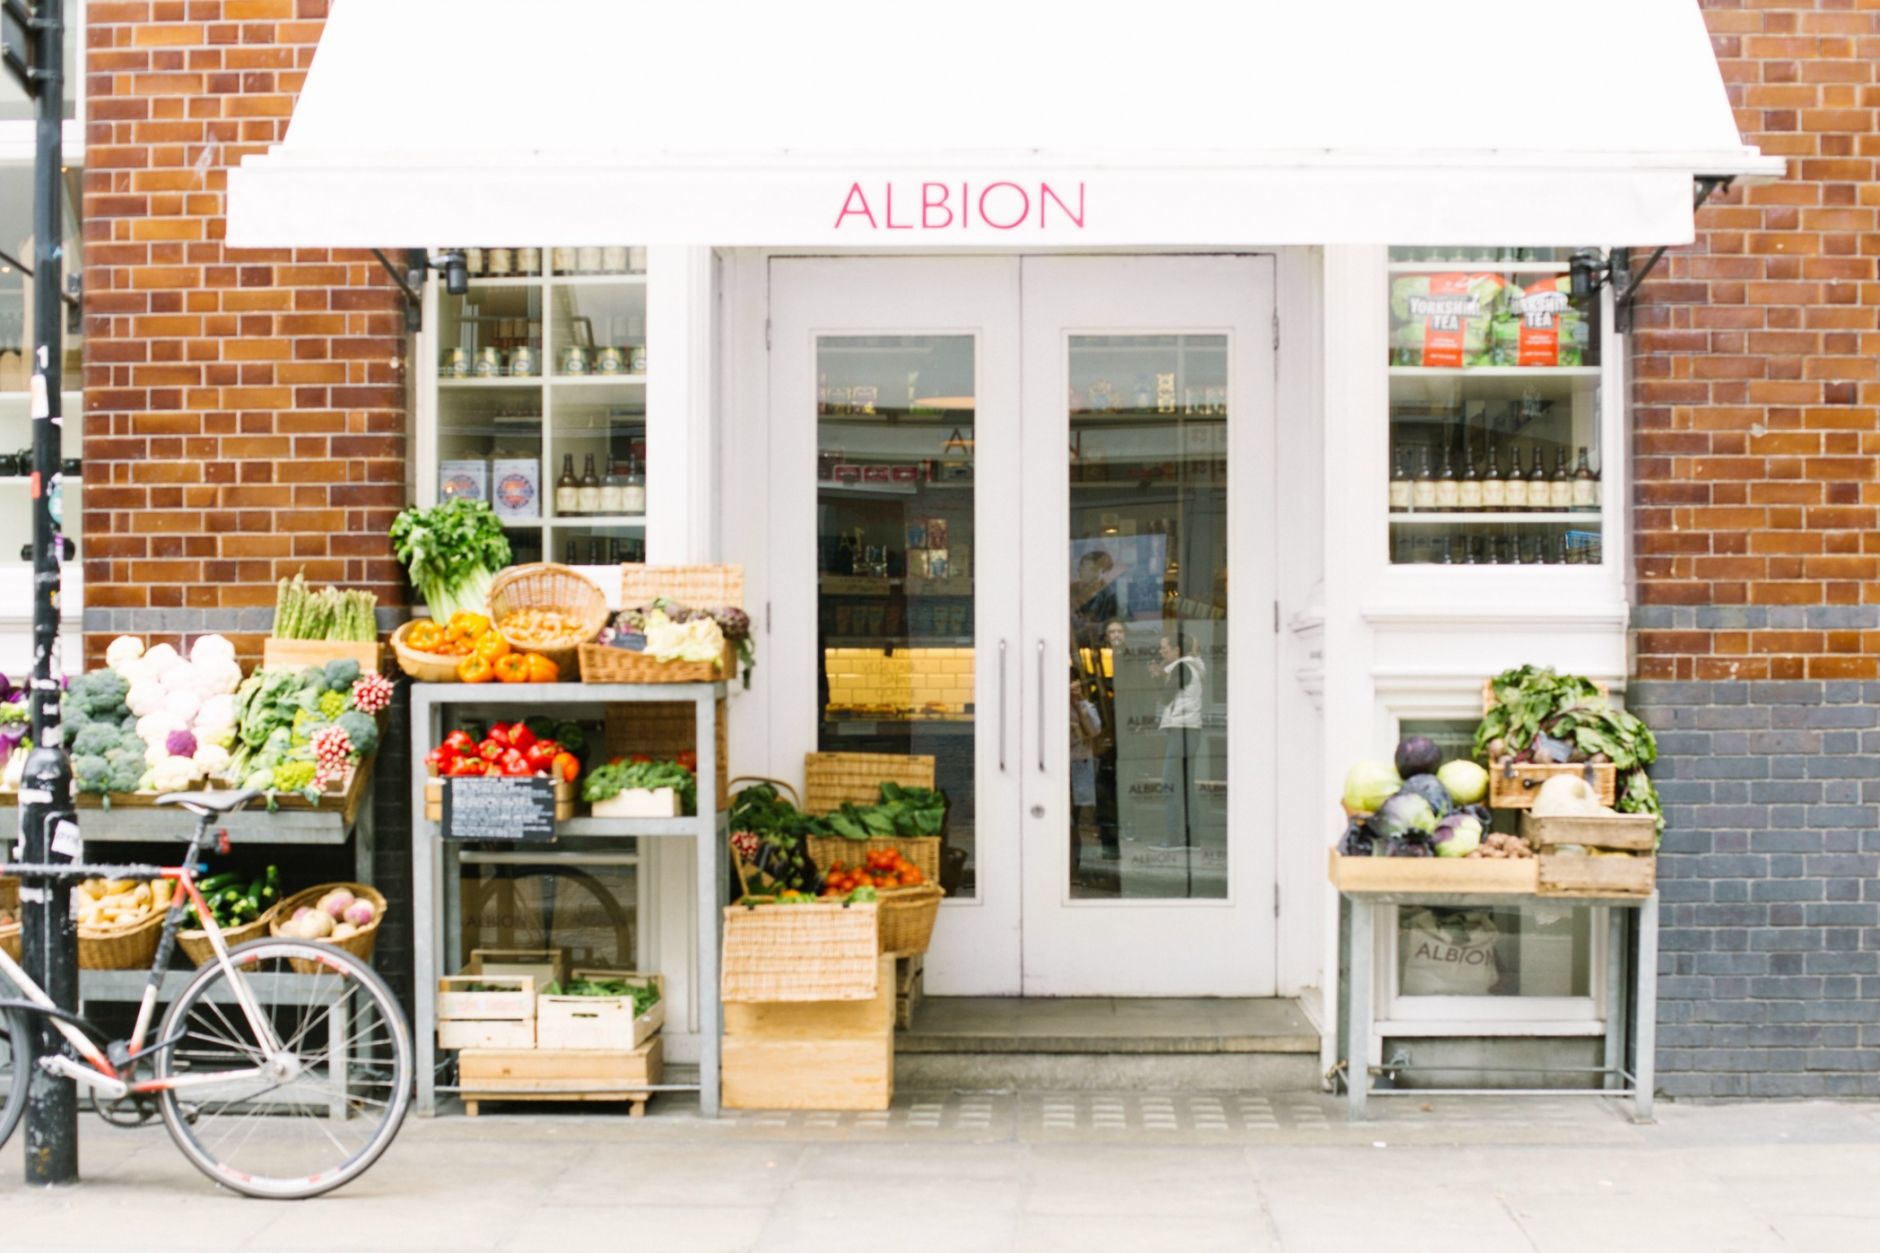 albion-cafe-bakery-food-store-Shoreditch-London-E2-7D-01